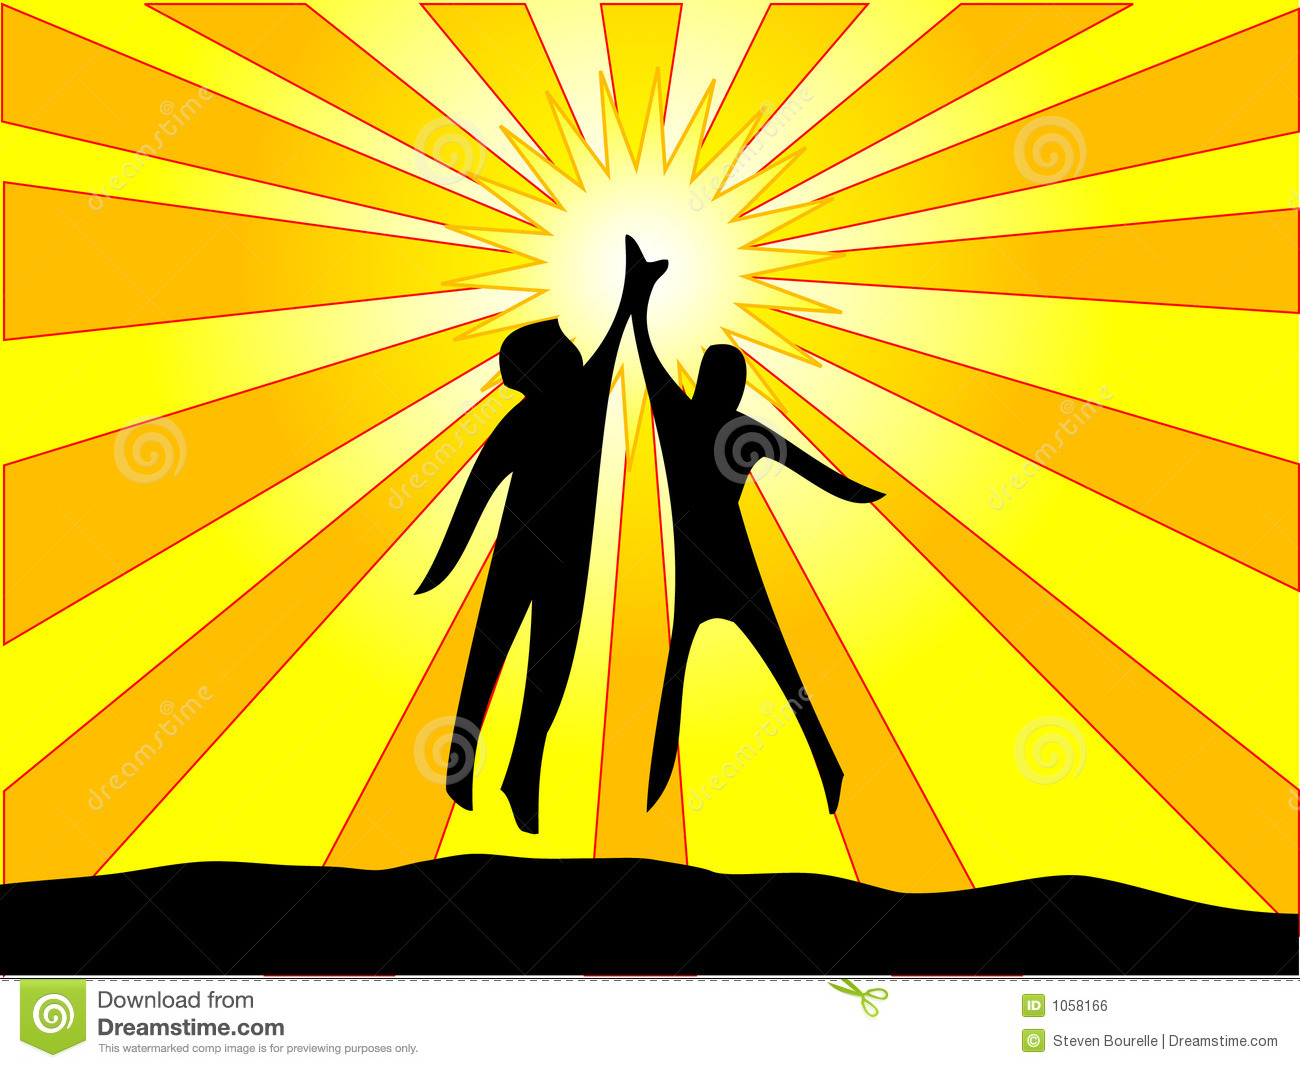 High Five Royalty Free Stock Image   Image  1058166